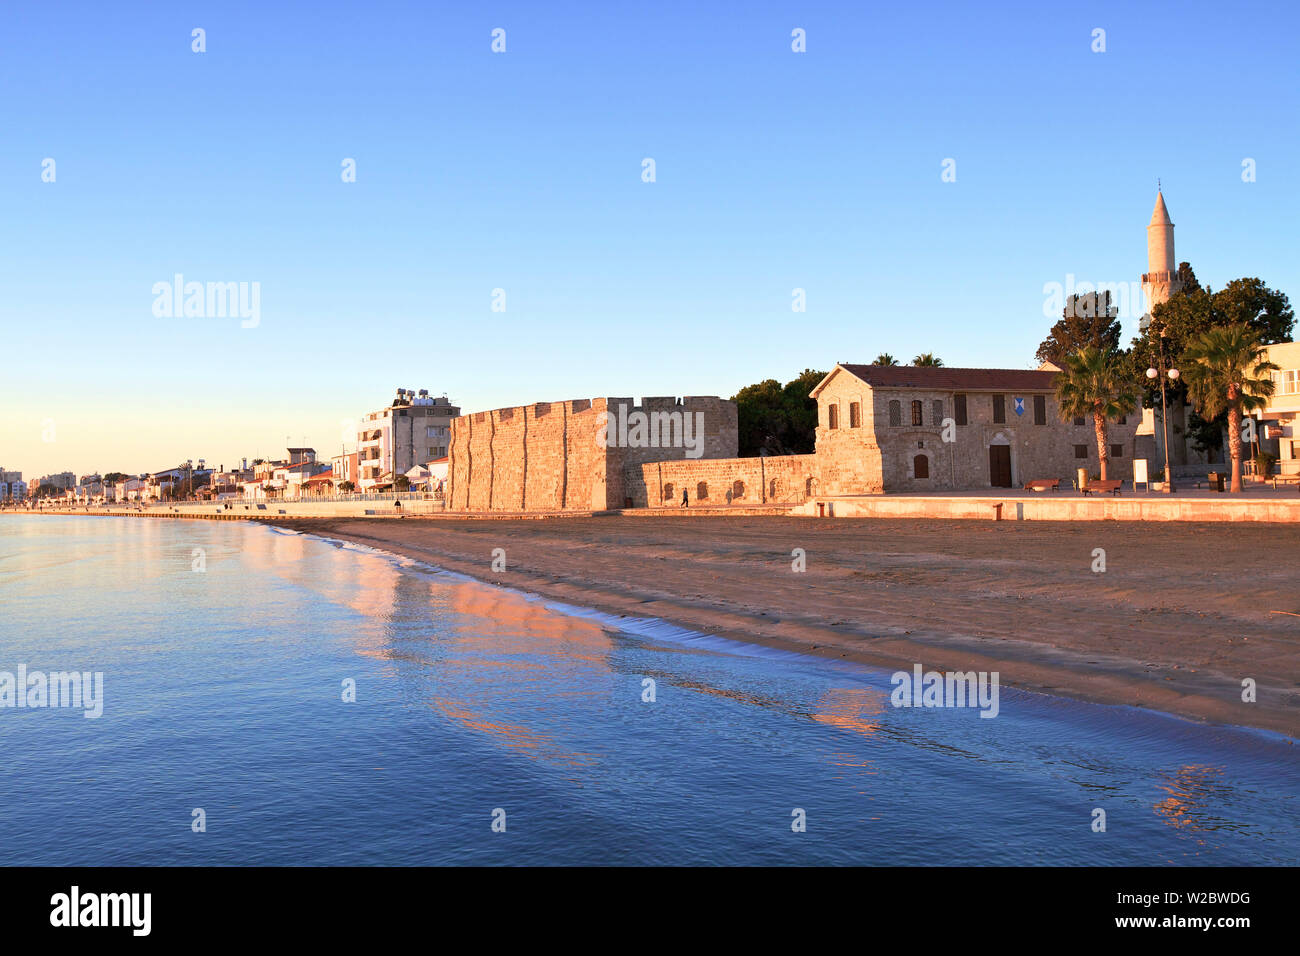 Larnaka Fort, Medieval Museum and Grand Mosque, Larnaka, Cyprus, Eastern Mediterranean Sea Stock Photo